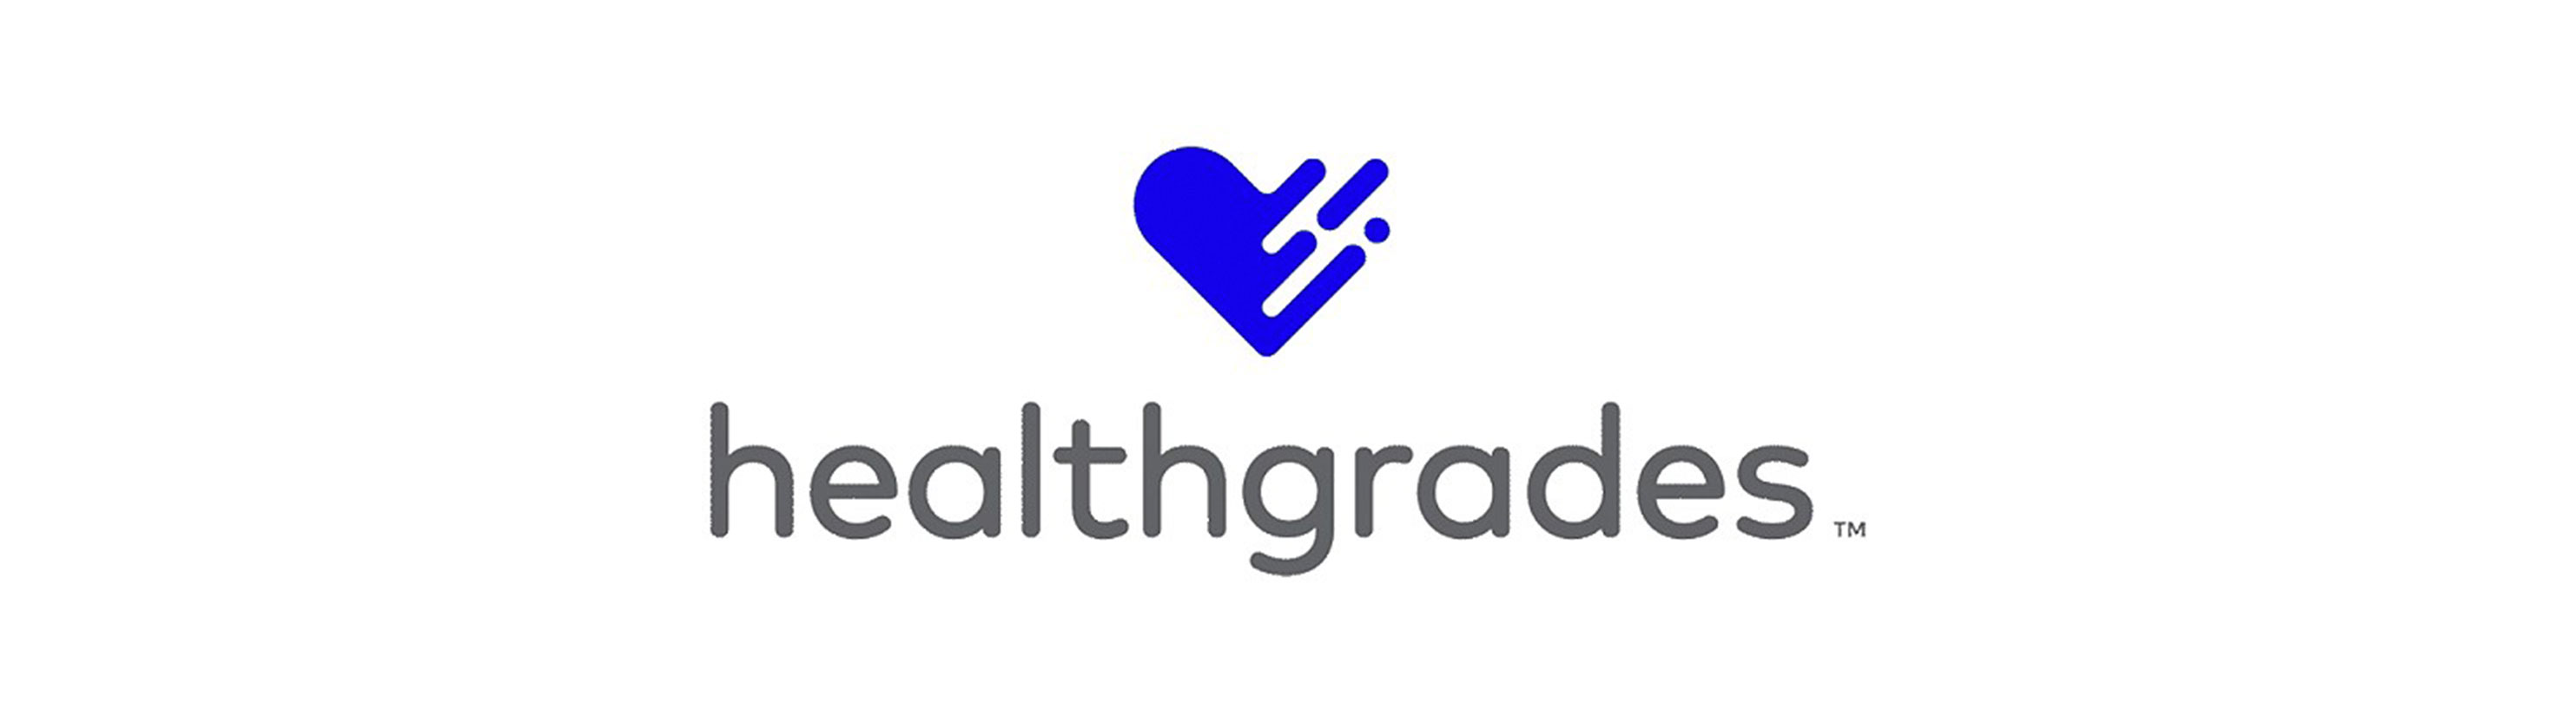 Hartford HealthCare Earns Excellence Awards and Five-Star Ratings From Healthgrades for High Quality Care